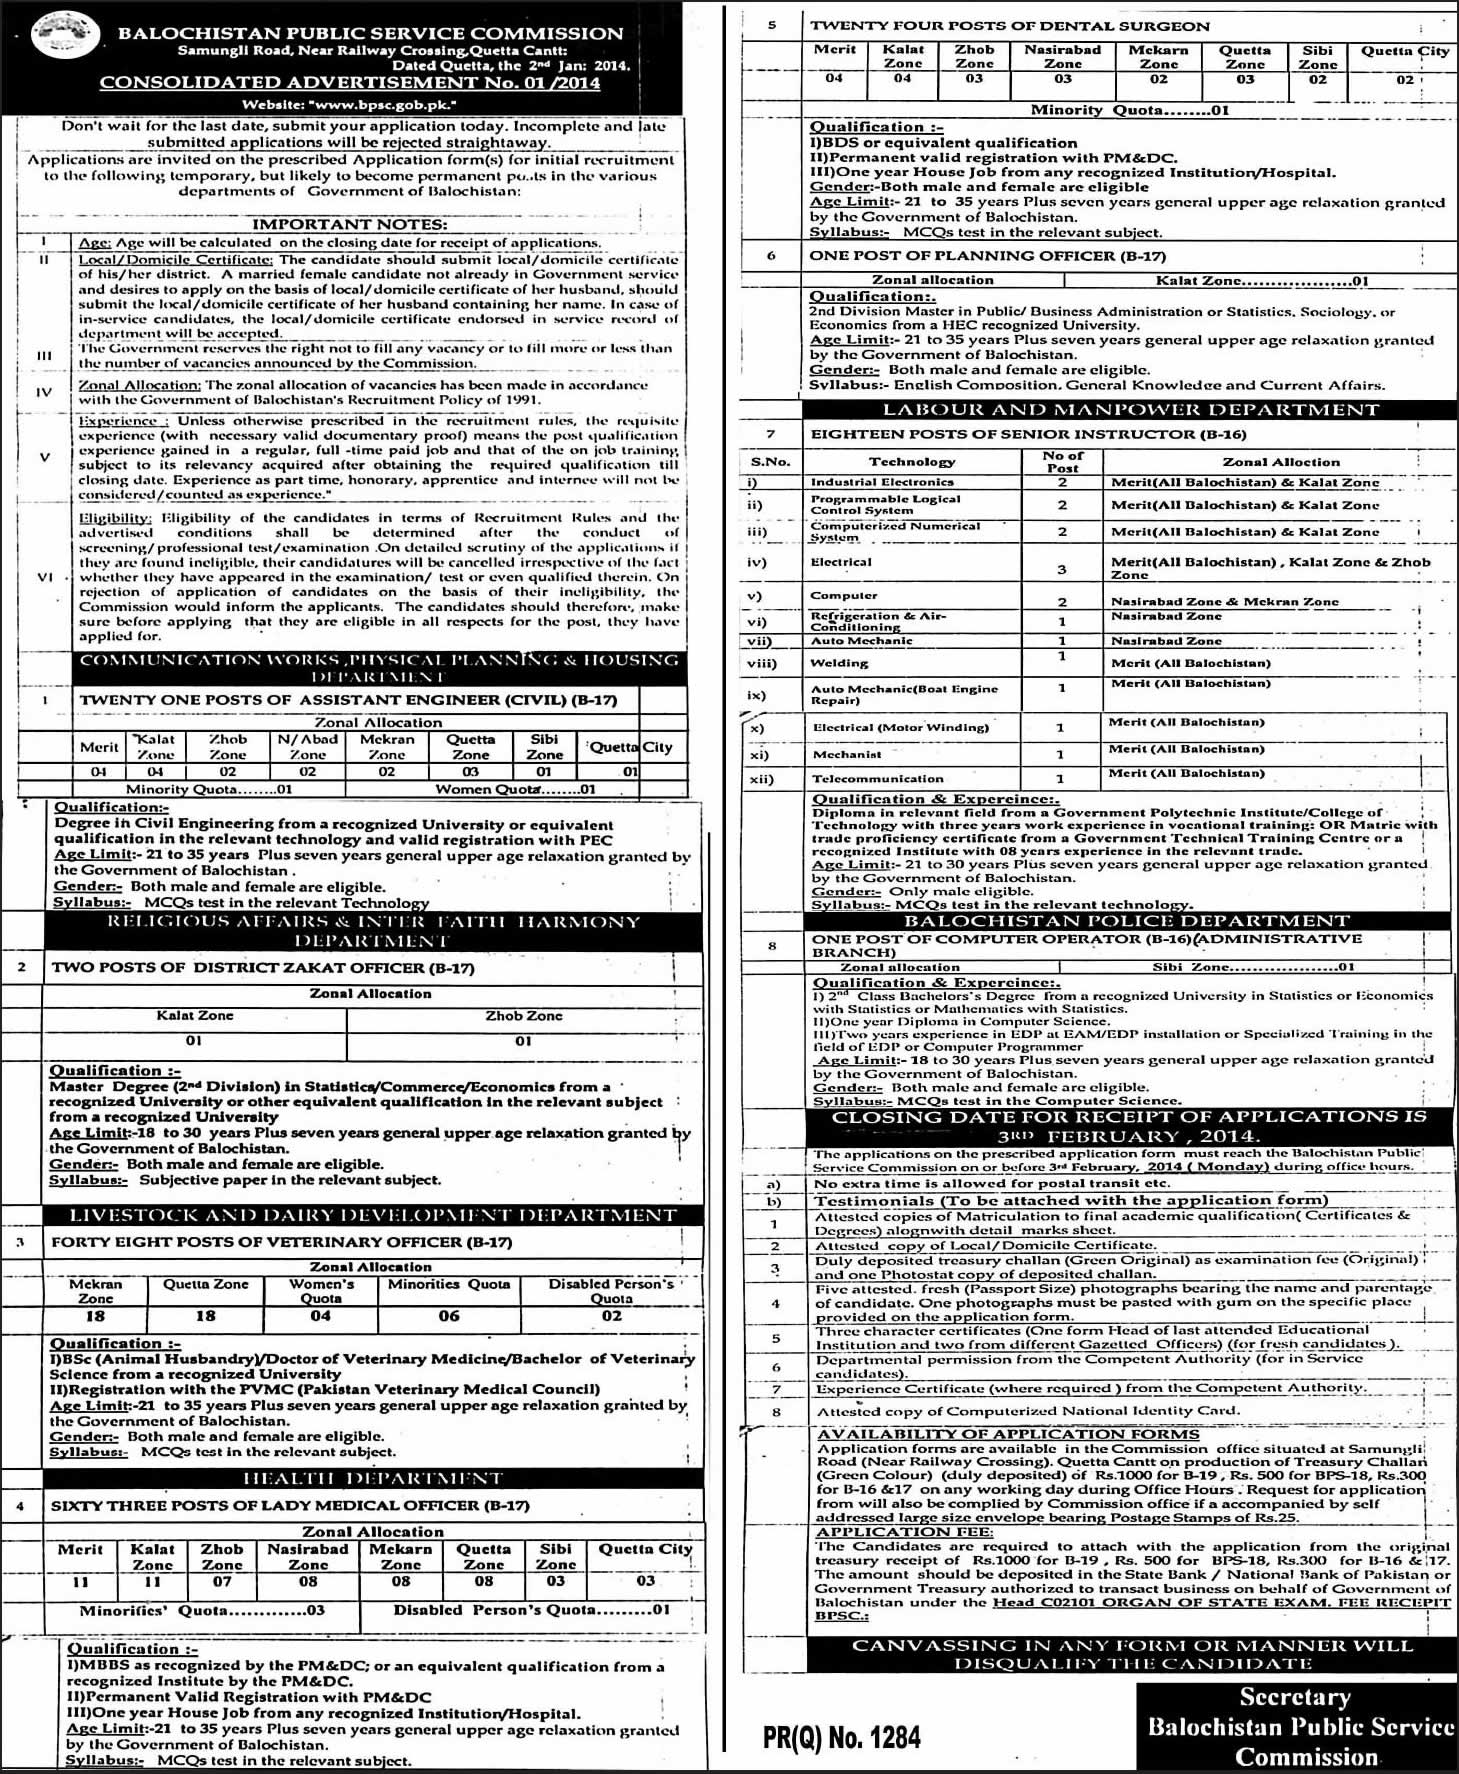 BPSC Jobs 2014 Latest Ad No. 01/2014